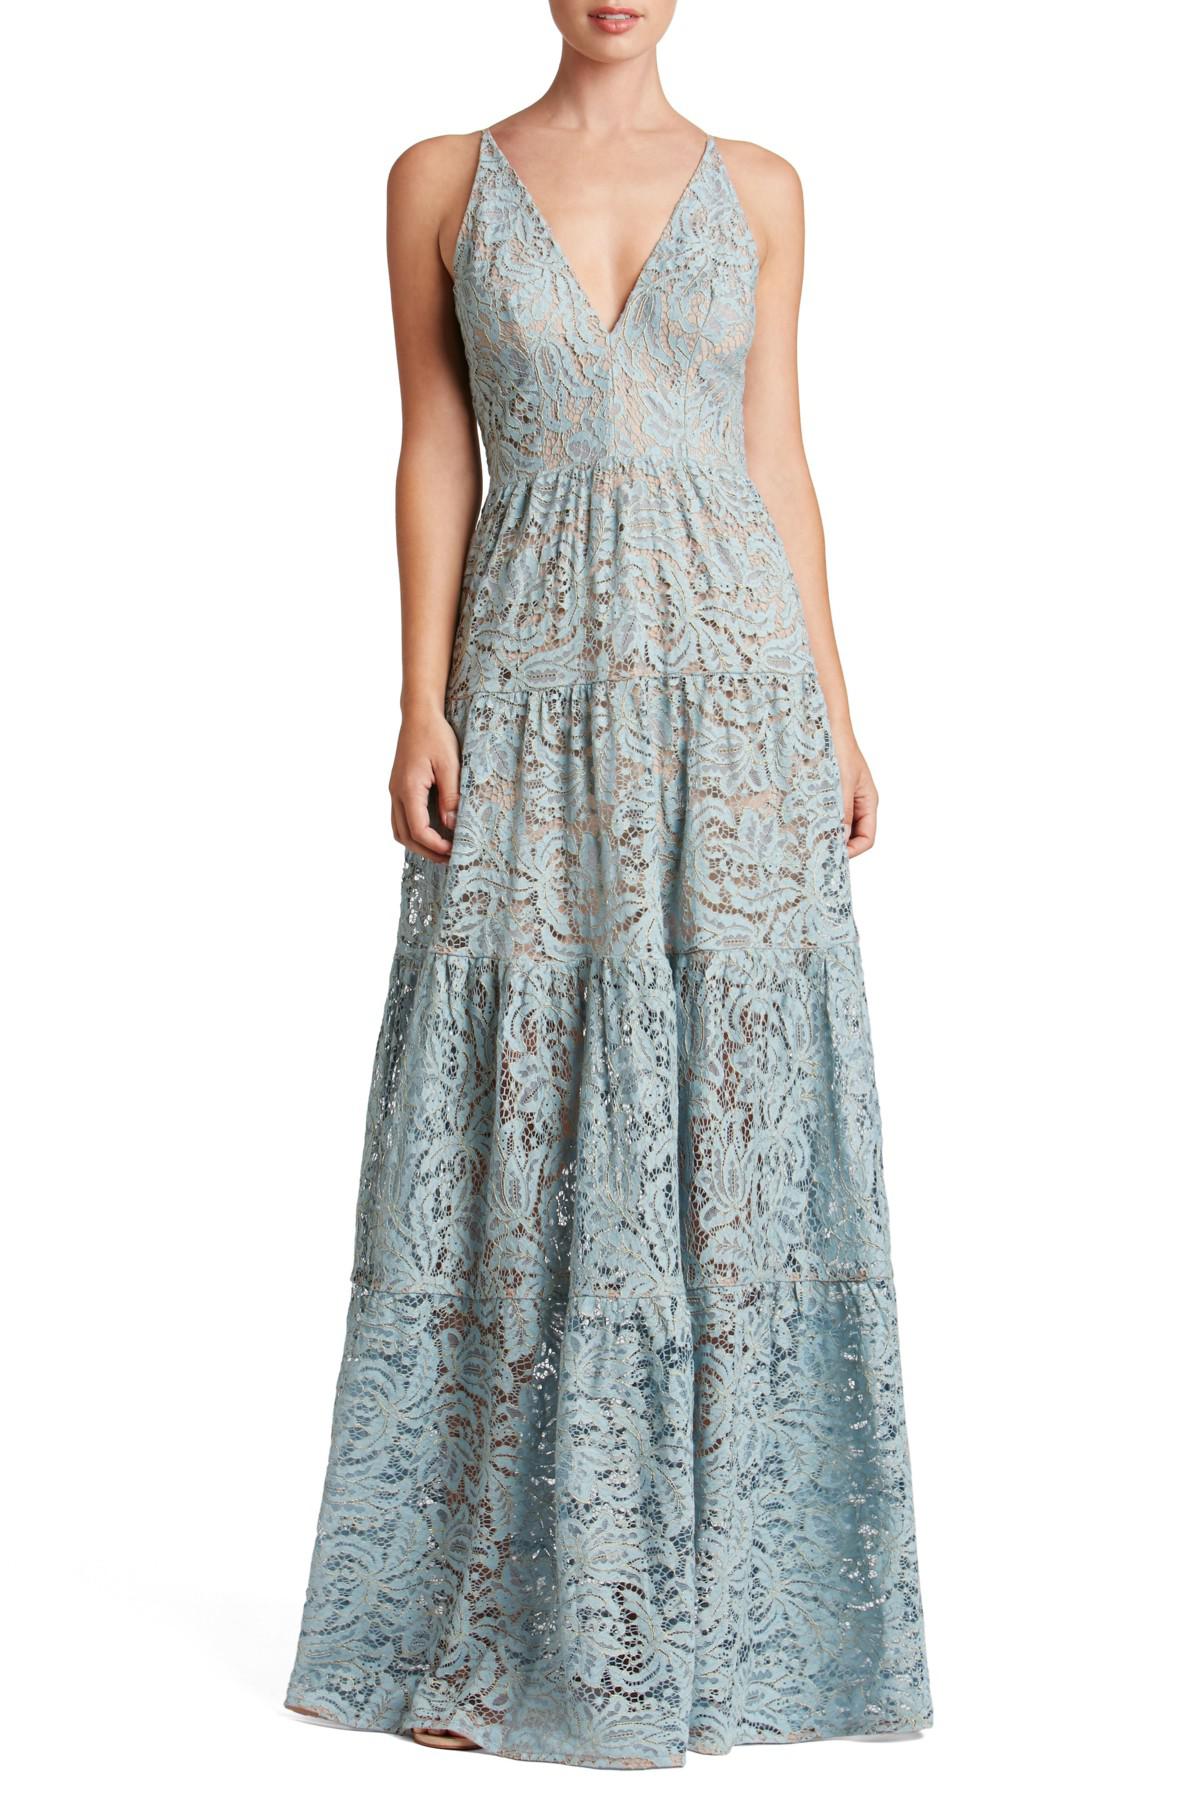 Dress the Population Melina Lace Fit & Flare Maxi Dress in Blue - Lyst